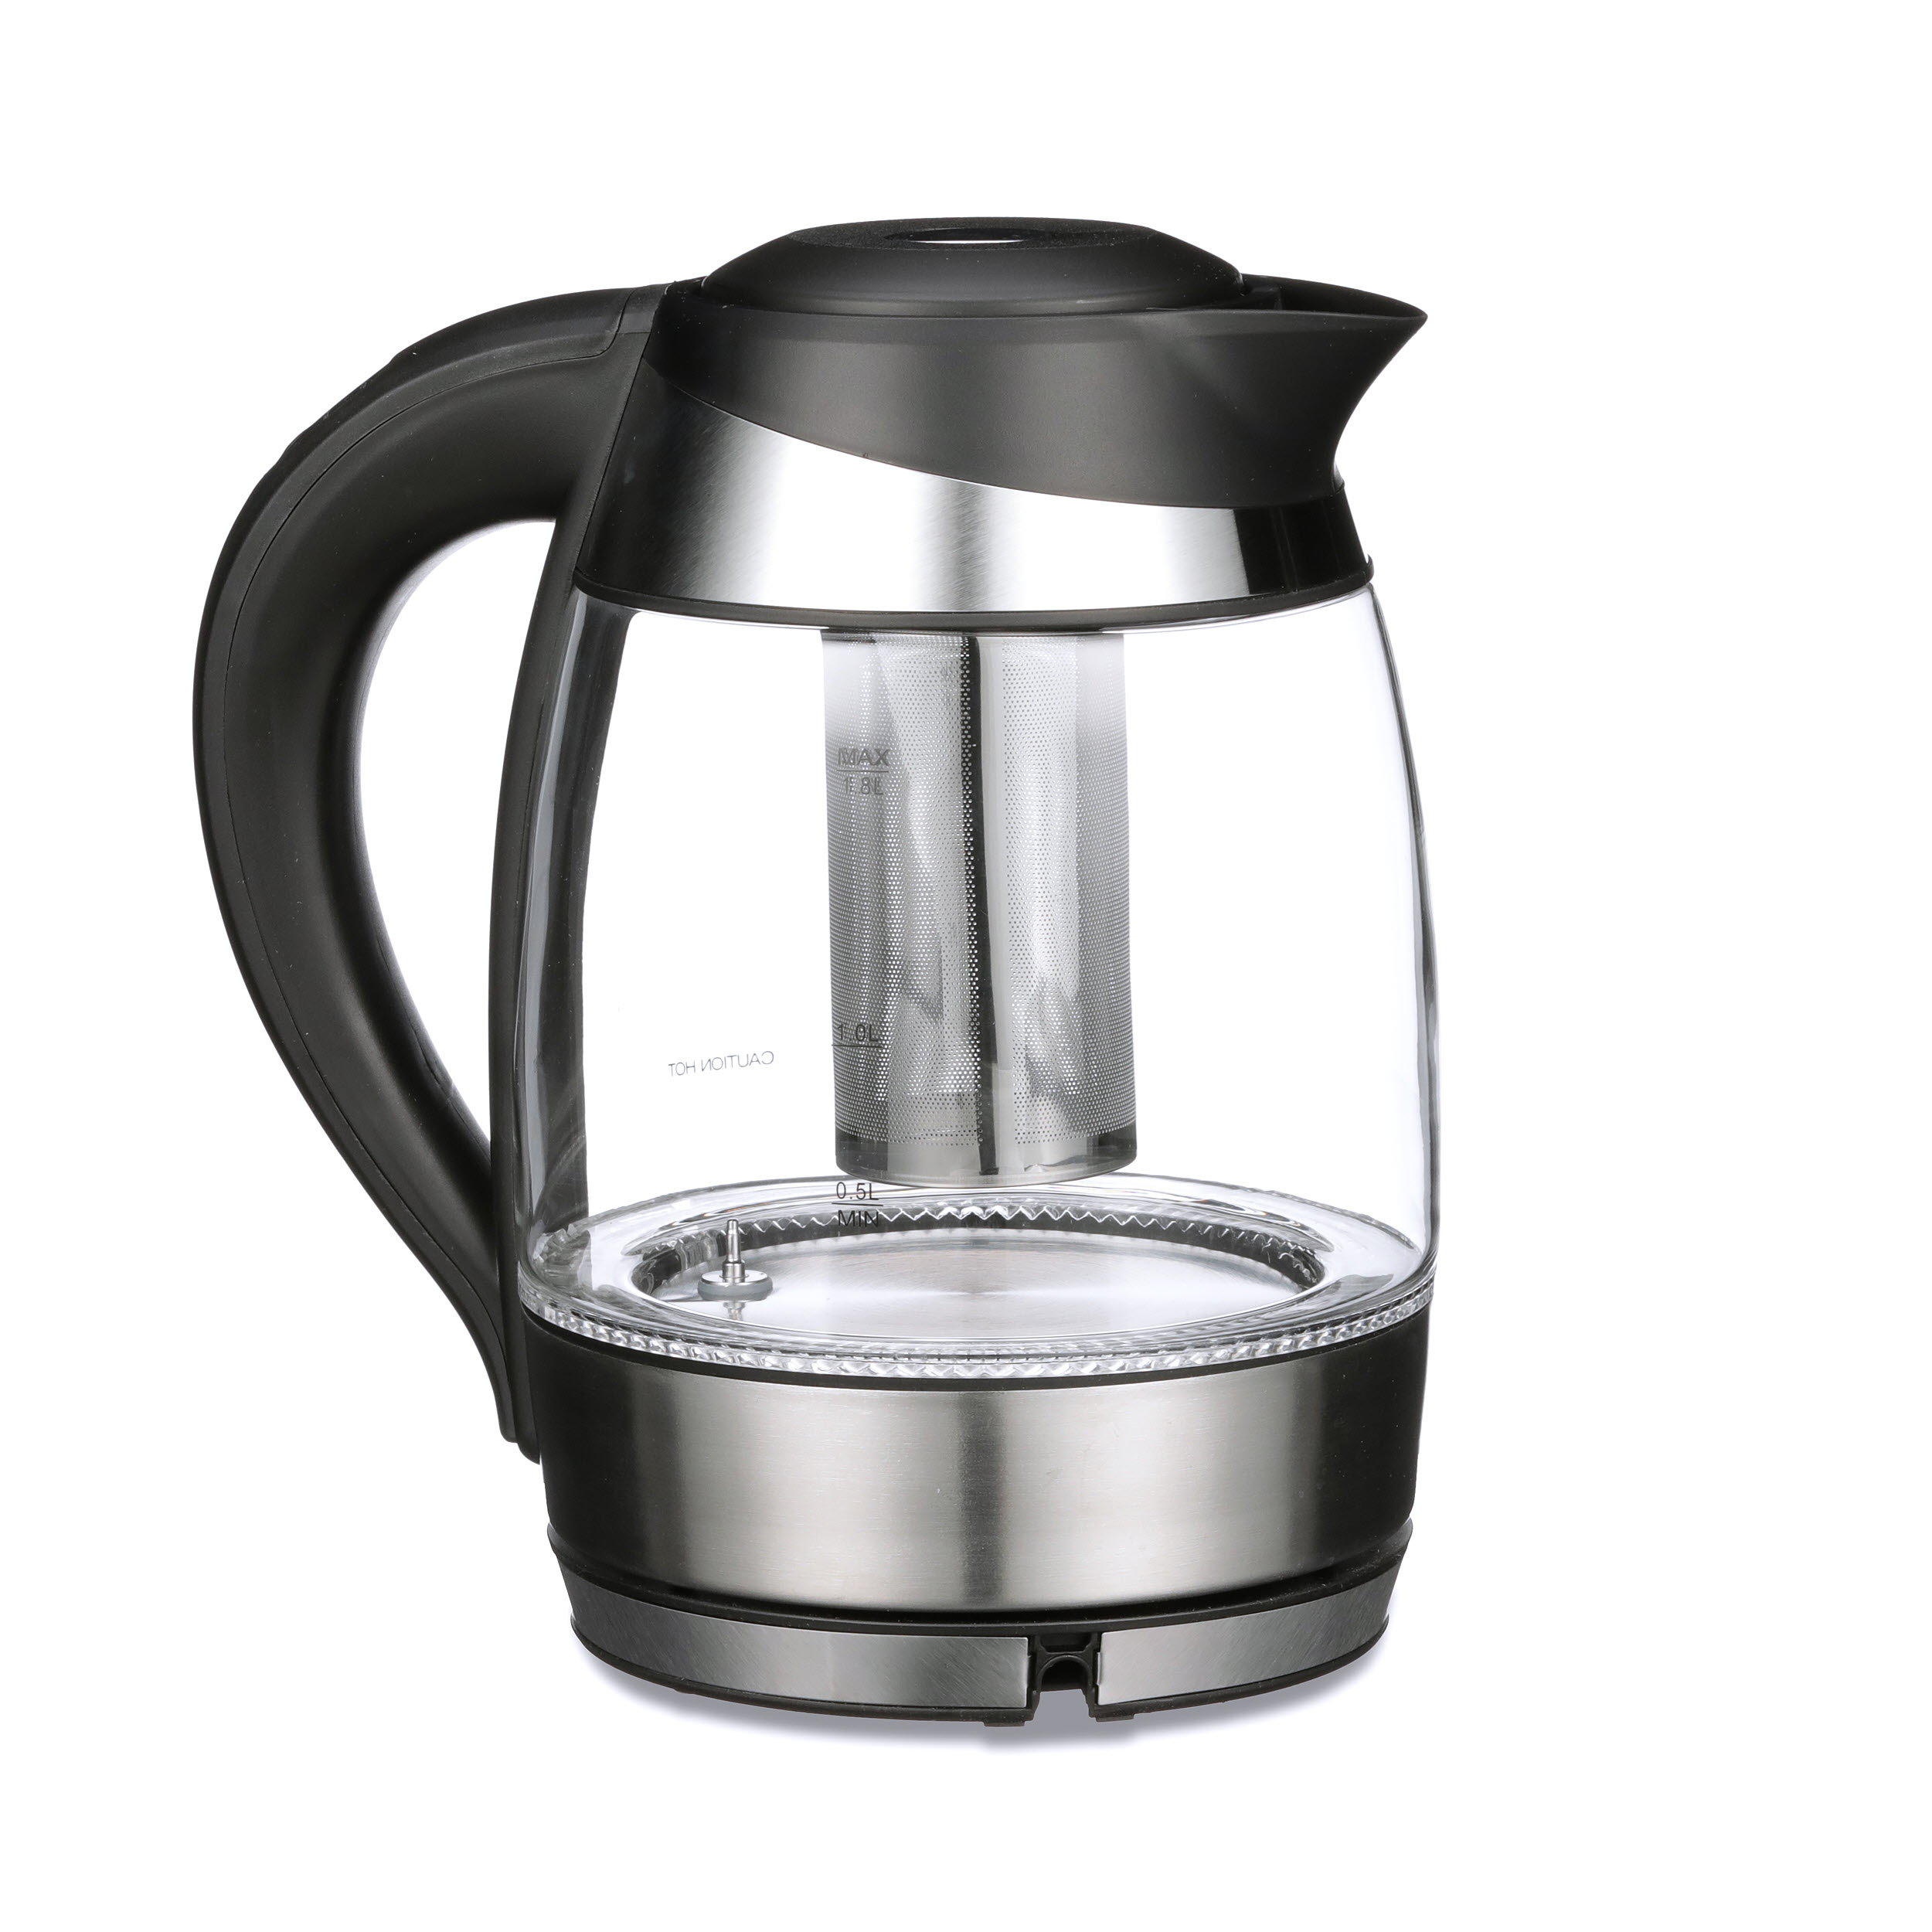 Chefman Electric Kettle w/ Tea Infuser Only $24.99 on BestBuy.com  (Regularly $55)